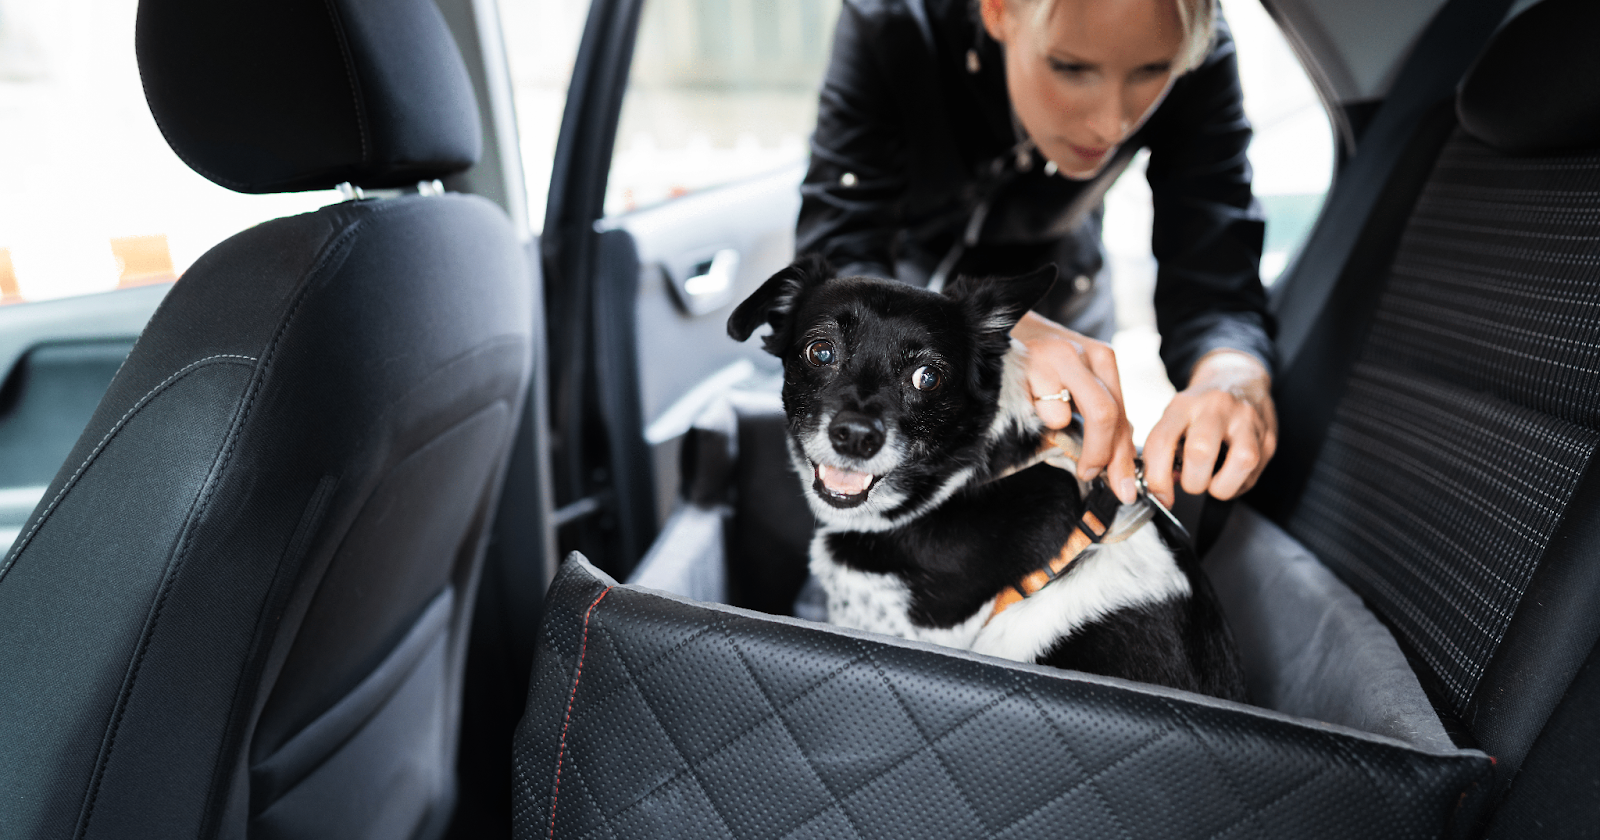 Small black and white dog being harnessed into dog carseat by woman